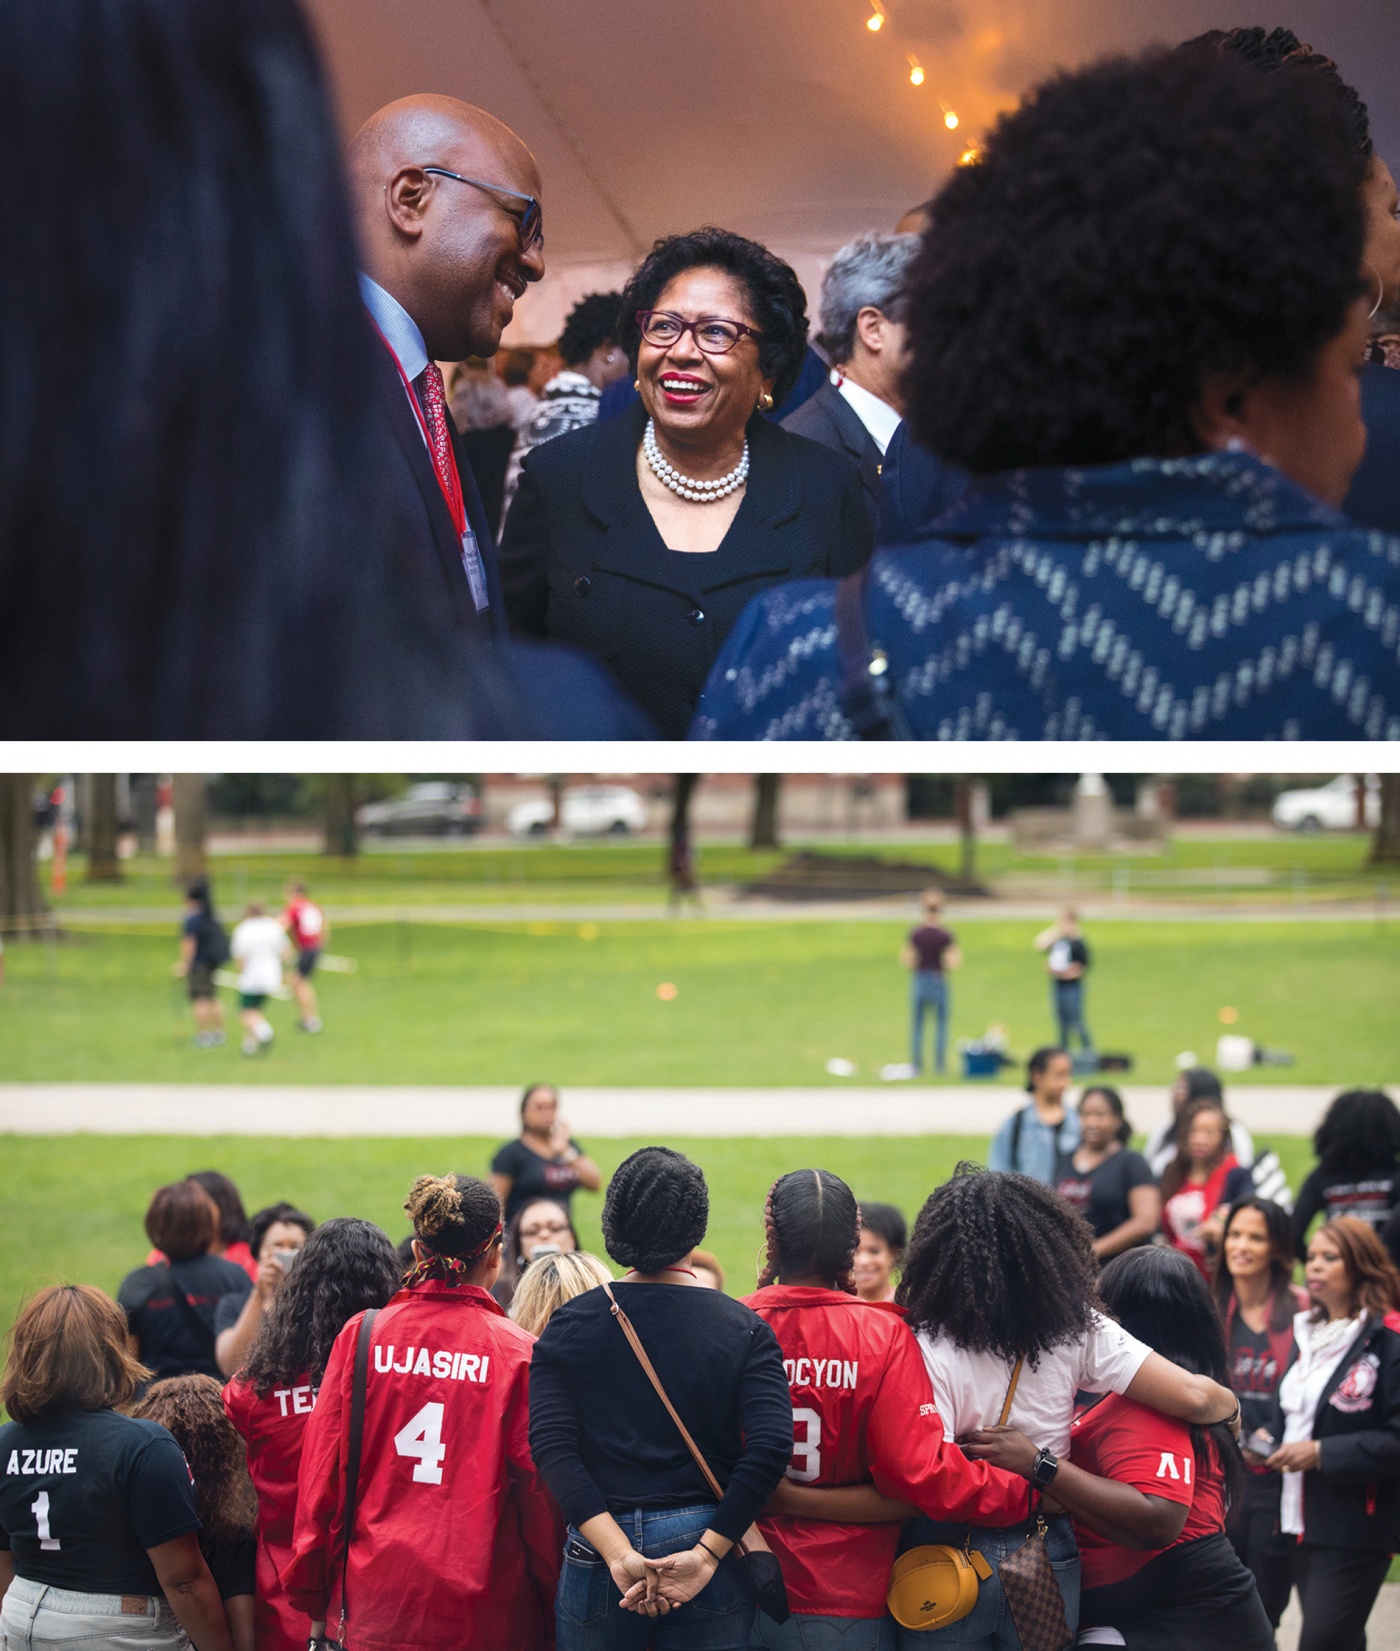 Photo of former President Ruth J. Simmons at top, and at bottom: friends pose for a photo in front of Faunce House.